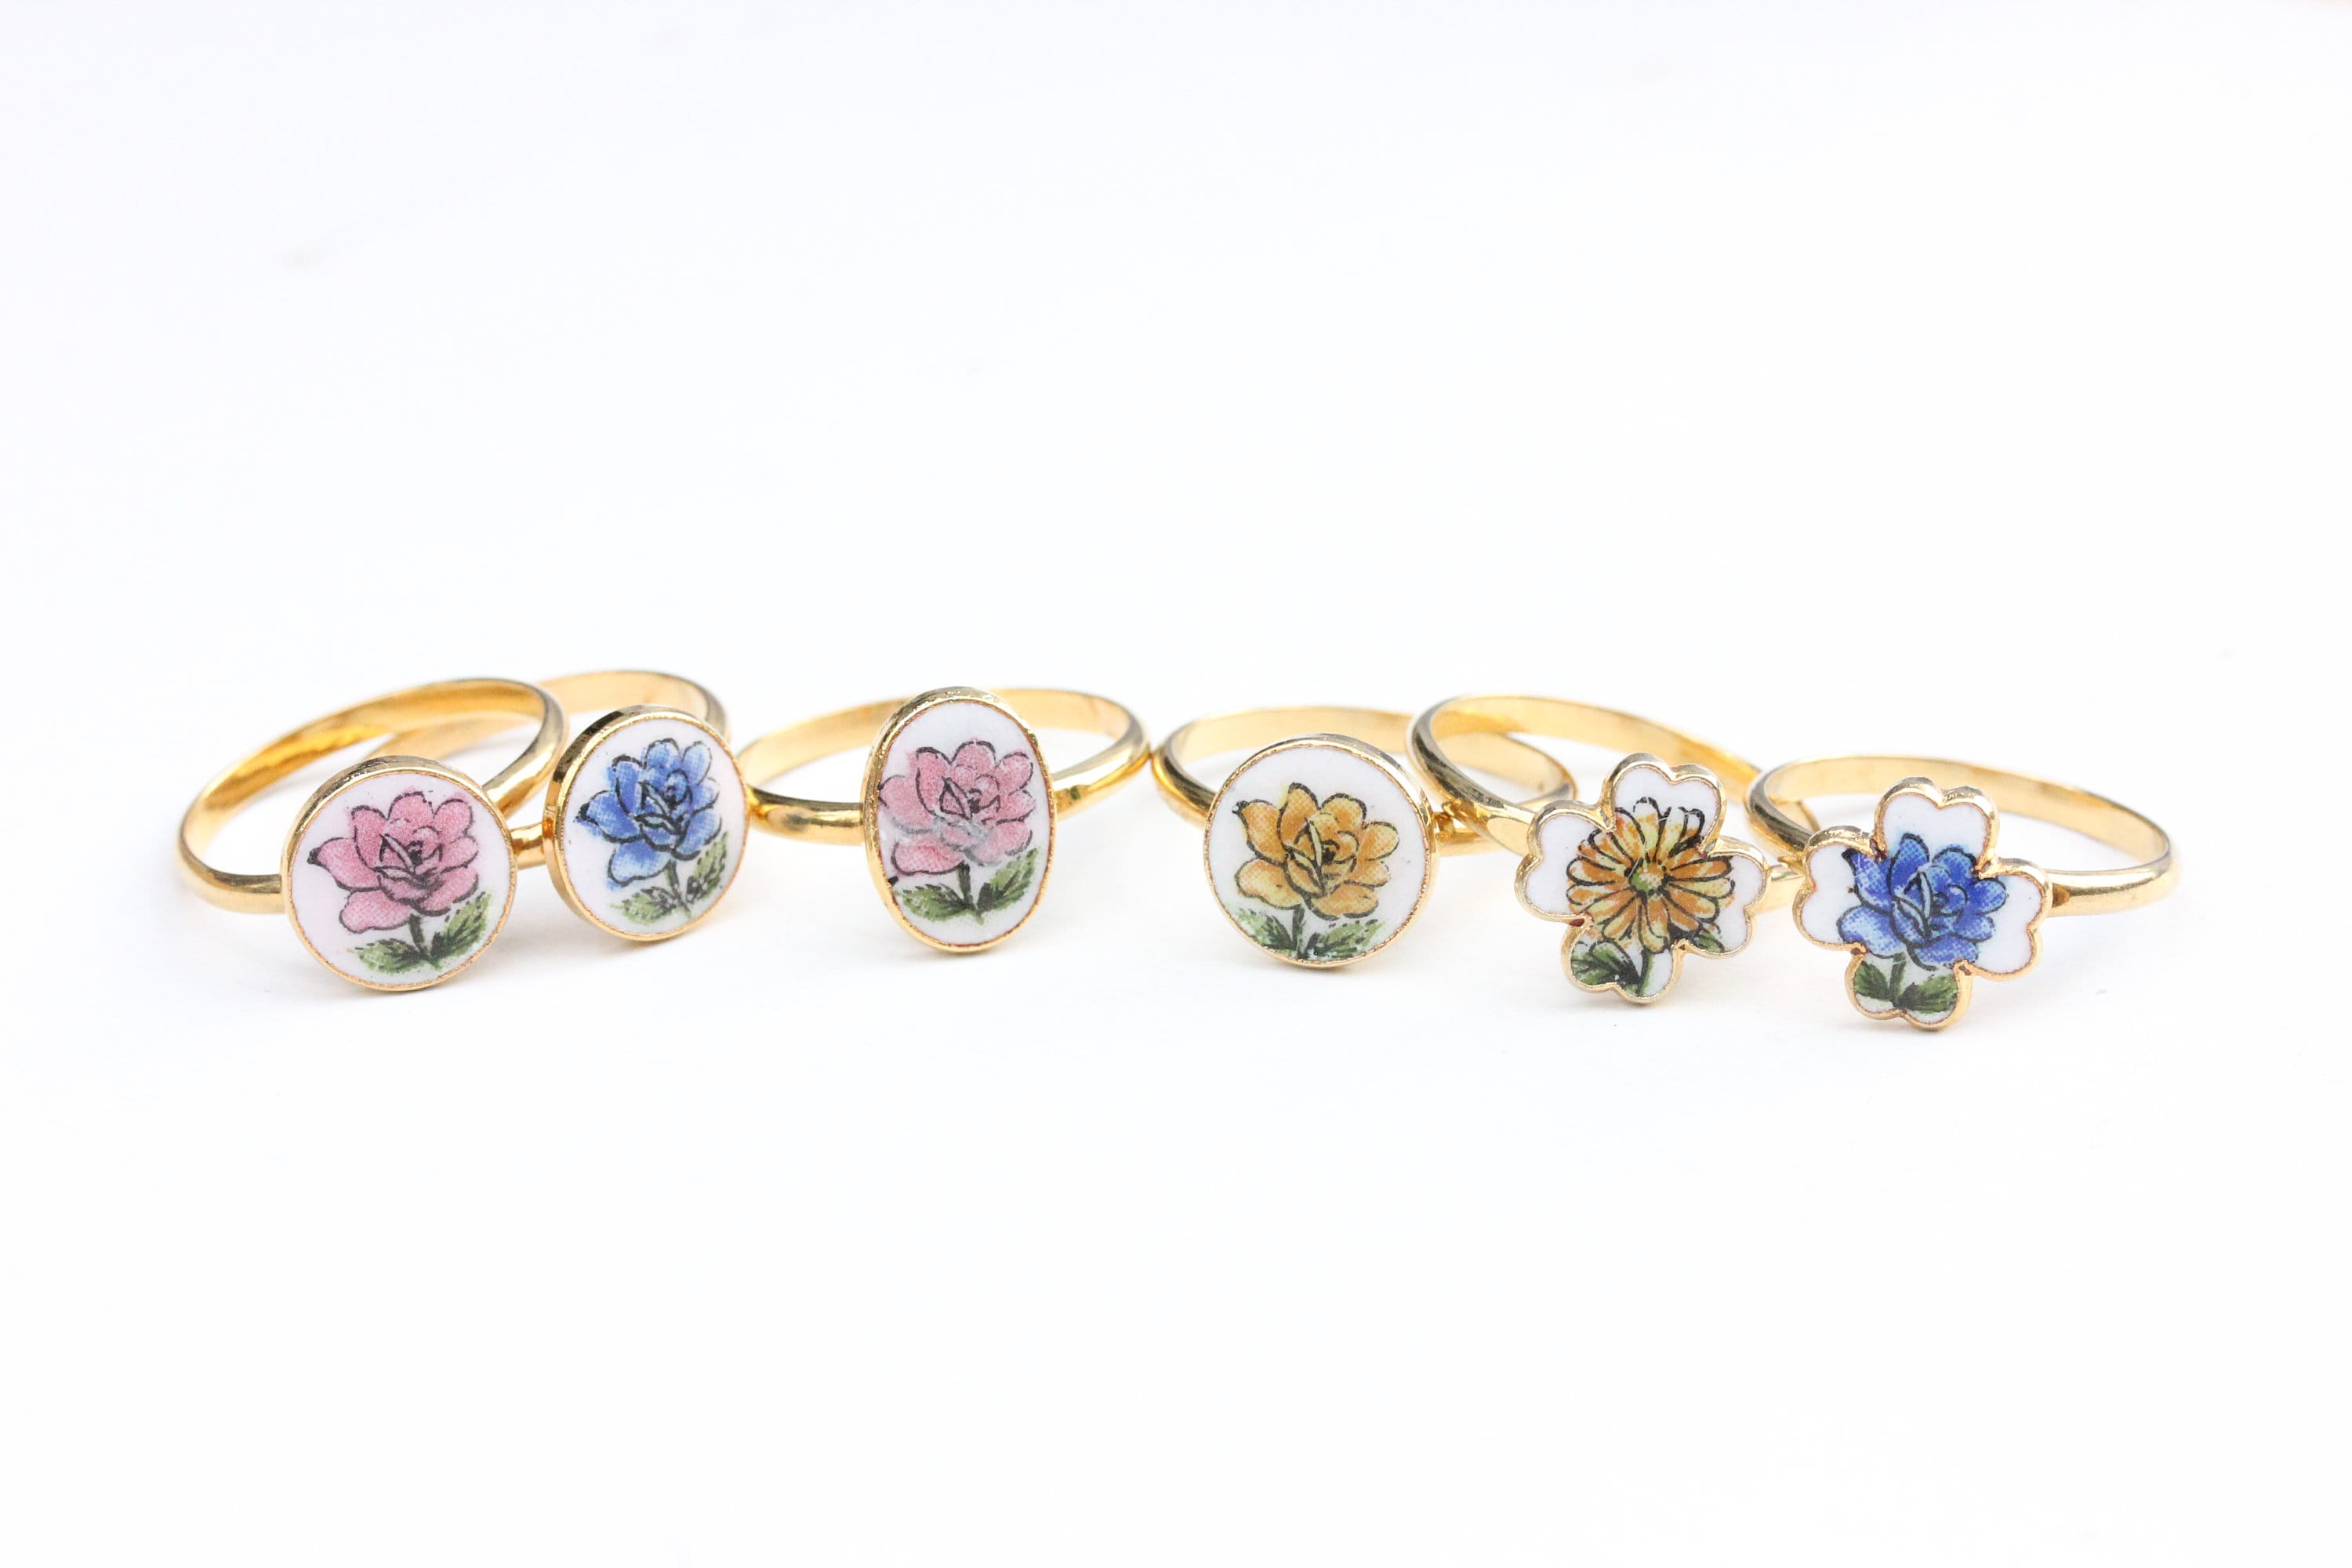 A FRENCH ENAMEL FLOWER RING in 18ct yellow gold, designe… | Drouot.com